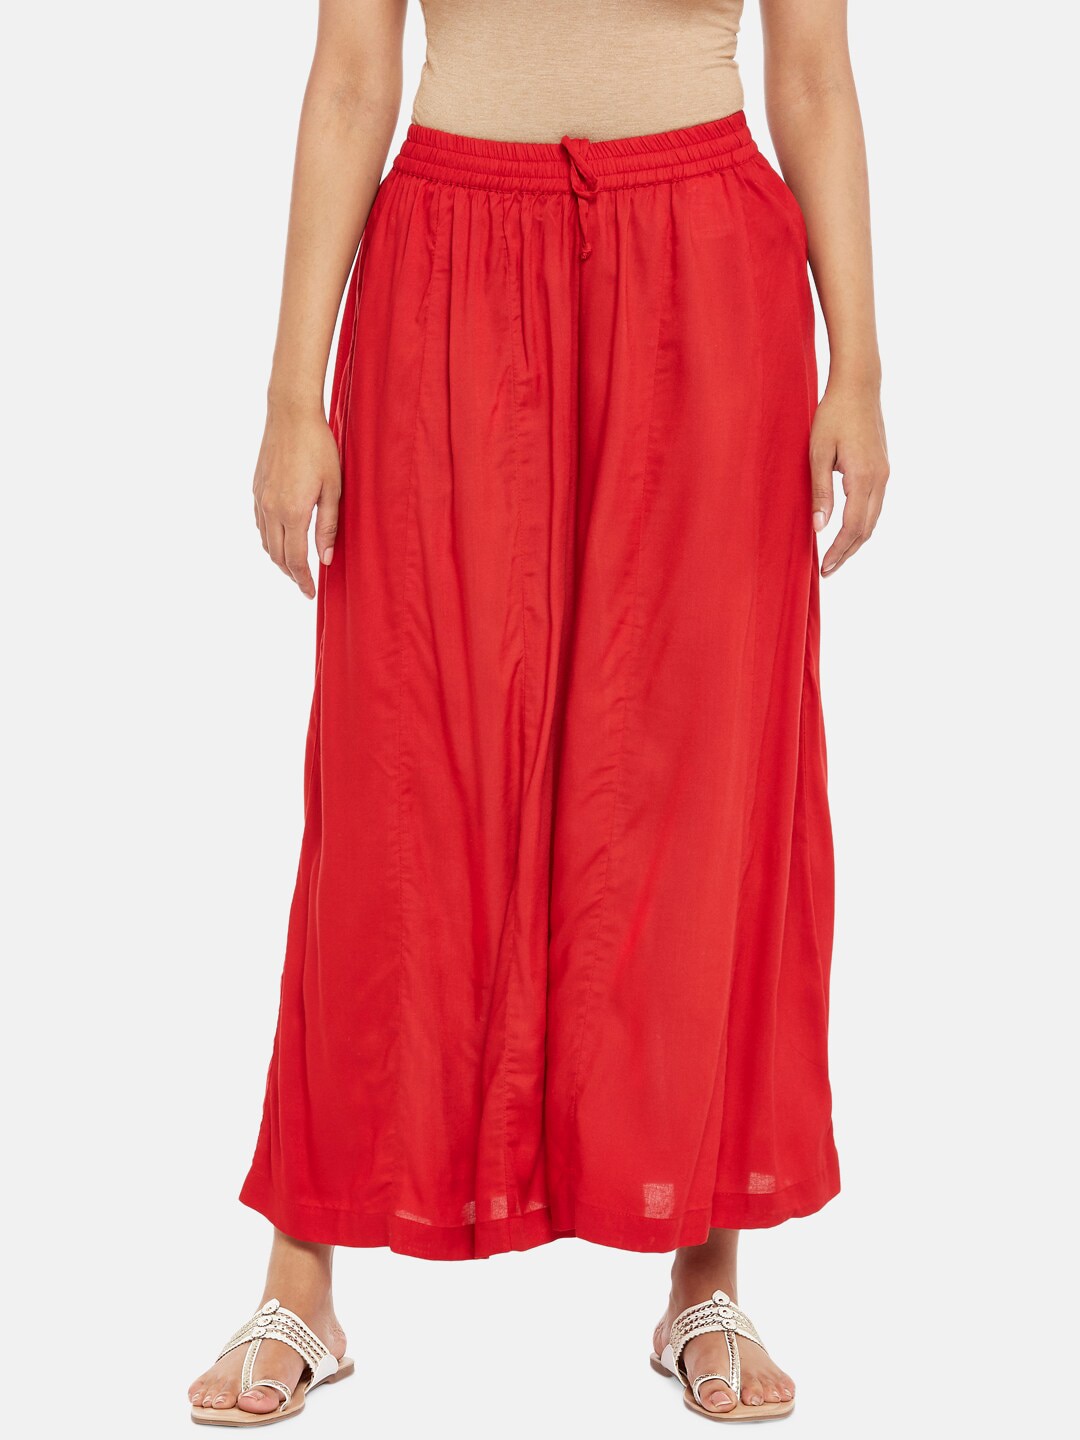 RANGMANCH BY PANTALOONS Women Red Flared Ethnic Palazzos Price in India